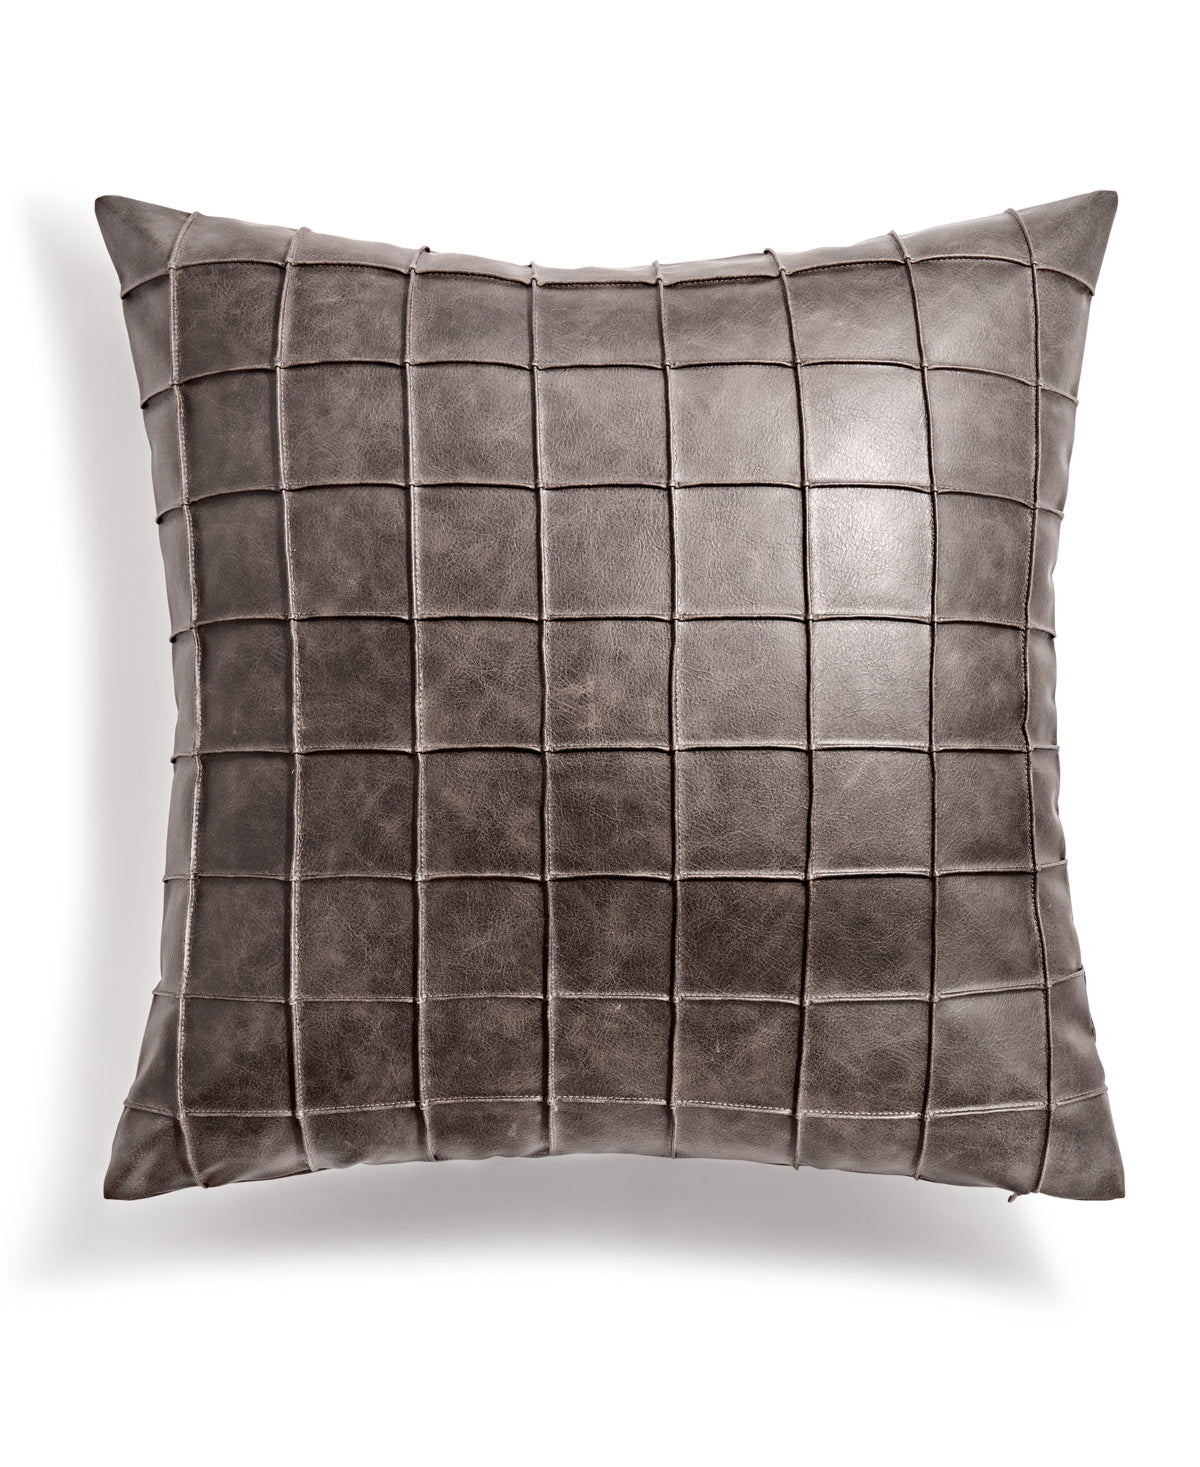 Akwaaba Inns for Hotel Collection Pleated Faux Leather Decorative Pillow, 18" x 18", Created for Macy's Bedding